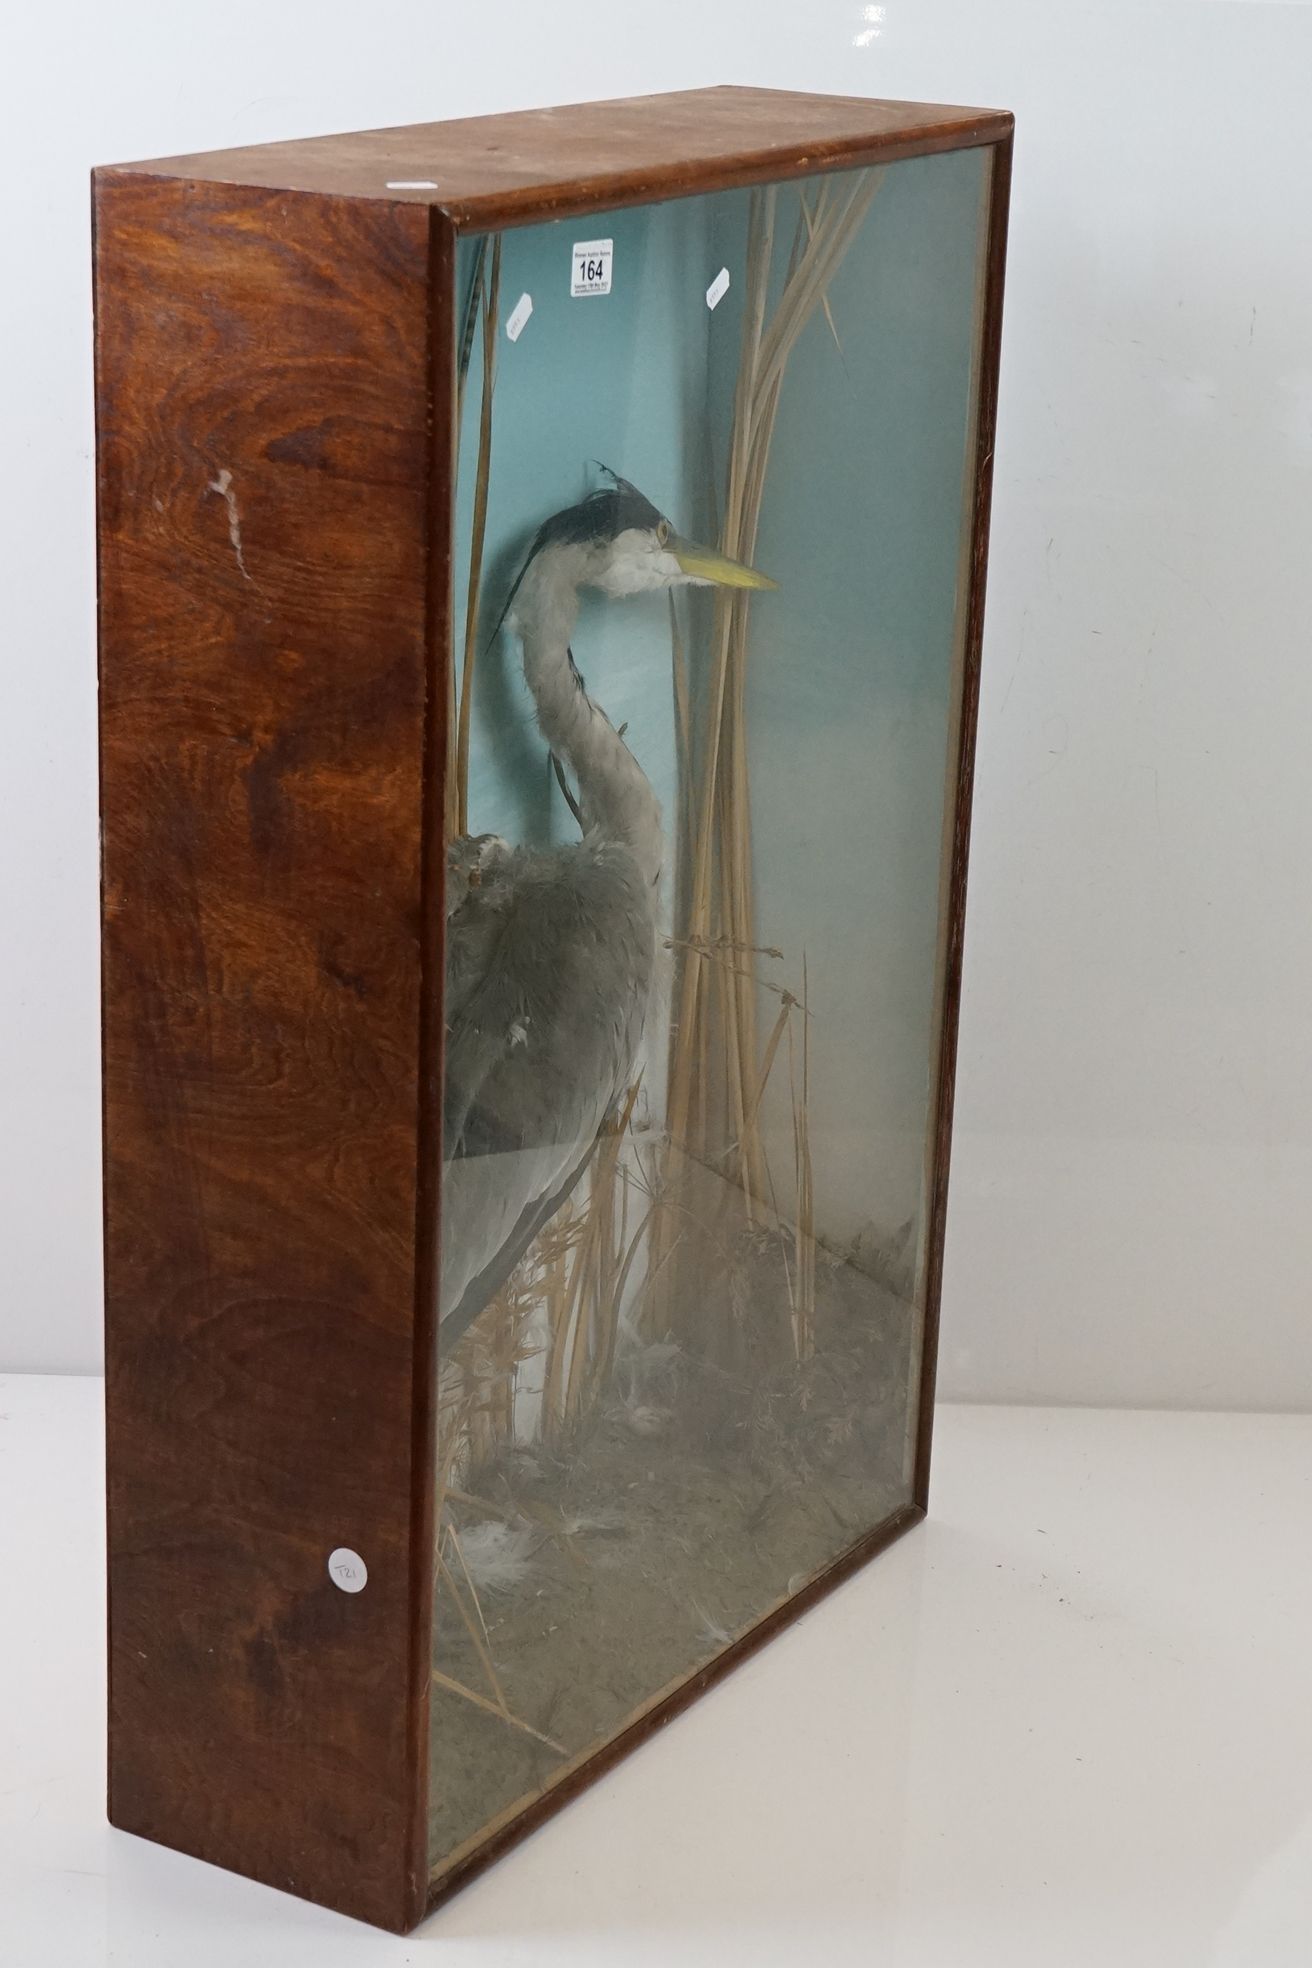 Taxidermy - Standing Heron mounted amongst natural foliage, contained in a glass fronted display - Image 8 of 8